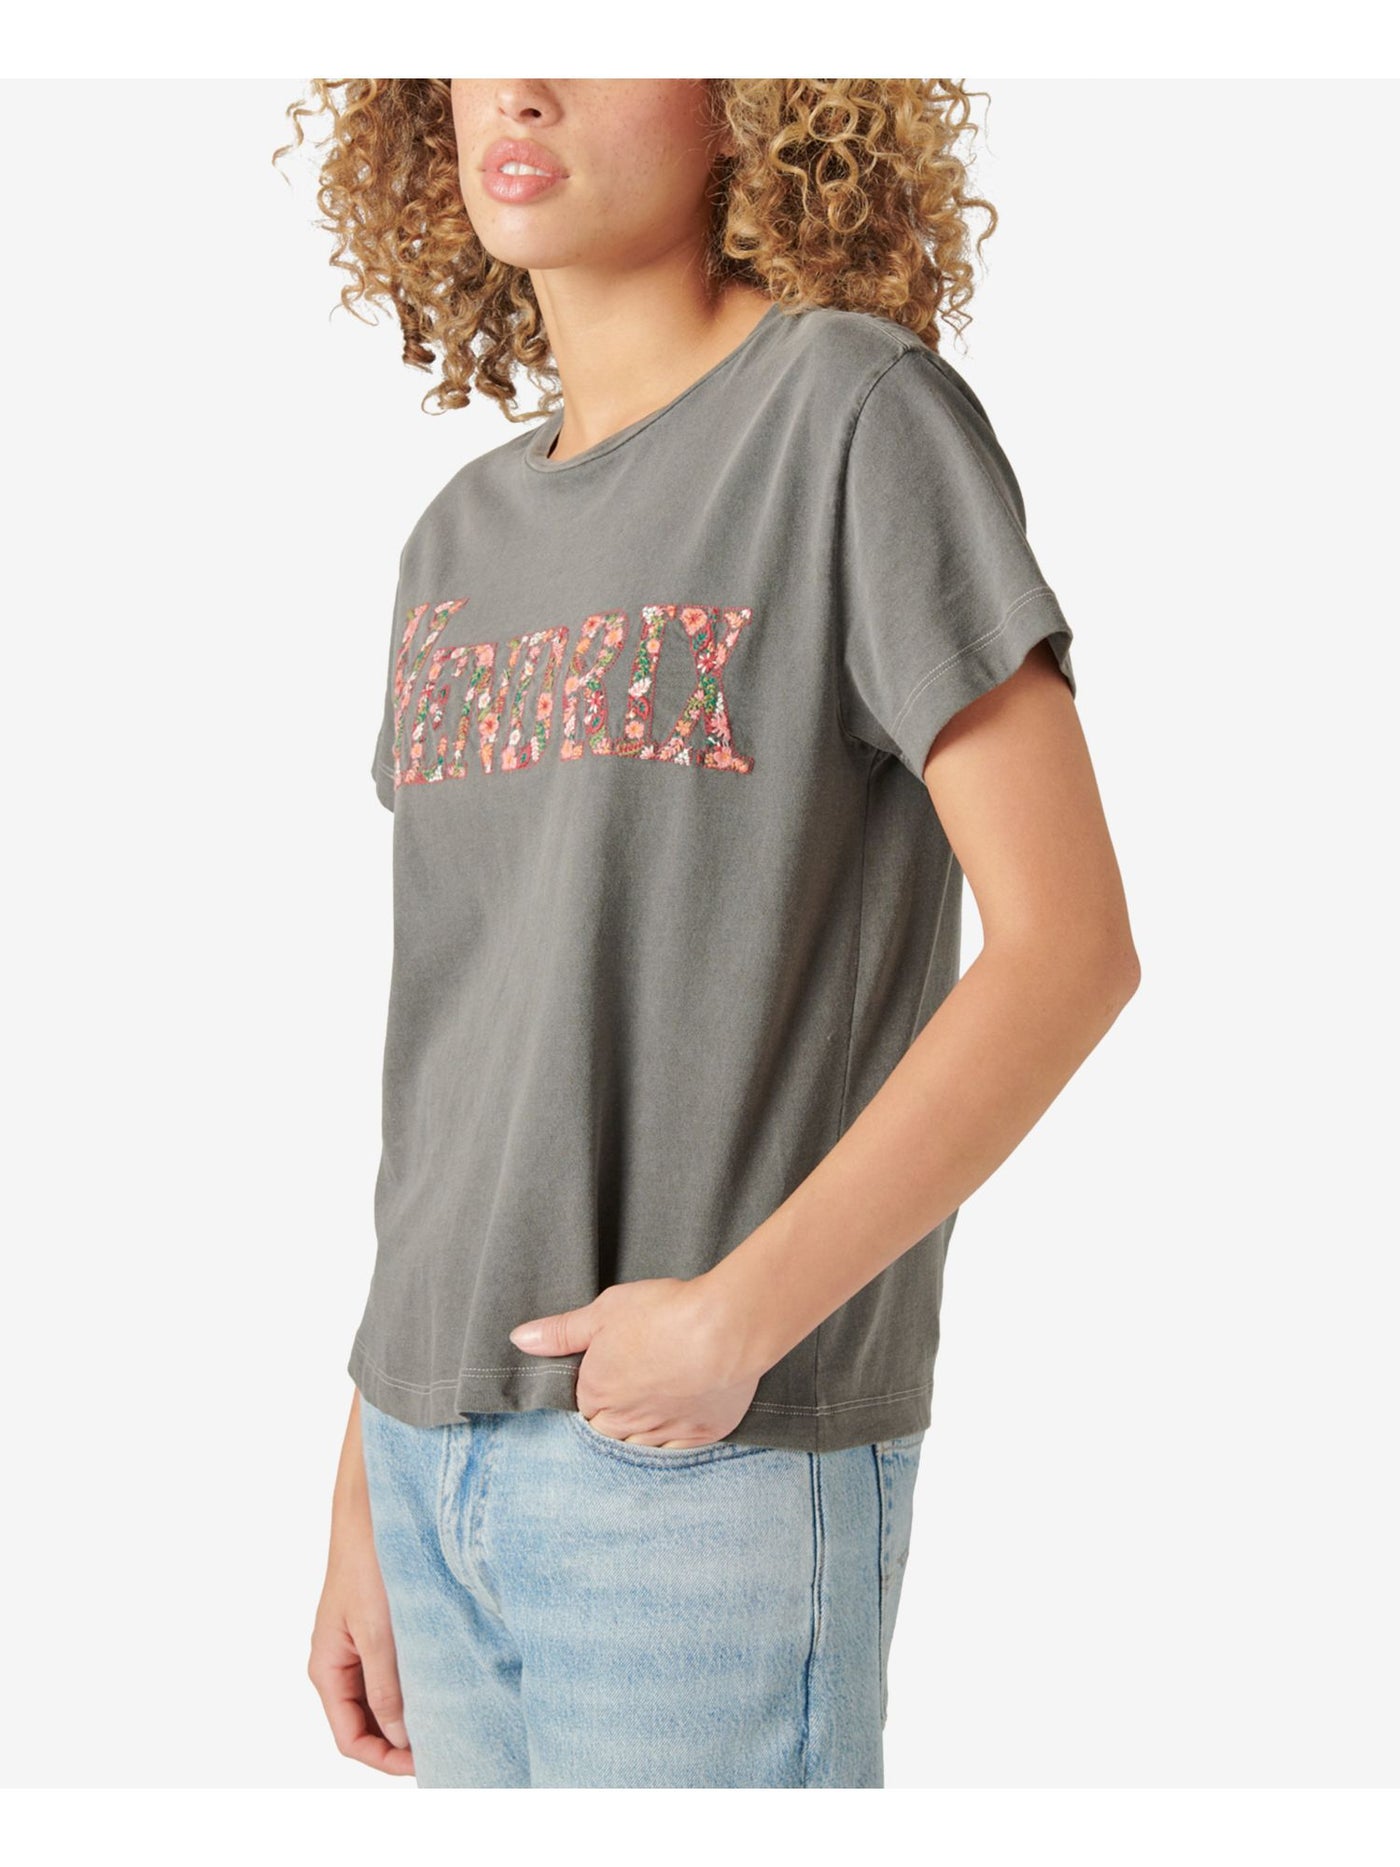 LUCKY BRAND Womens Gray Embroidered Pullover Back Center Seam Graphic Short Sleeve Crew Neck T-Shirt S